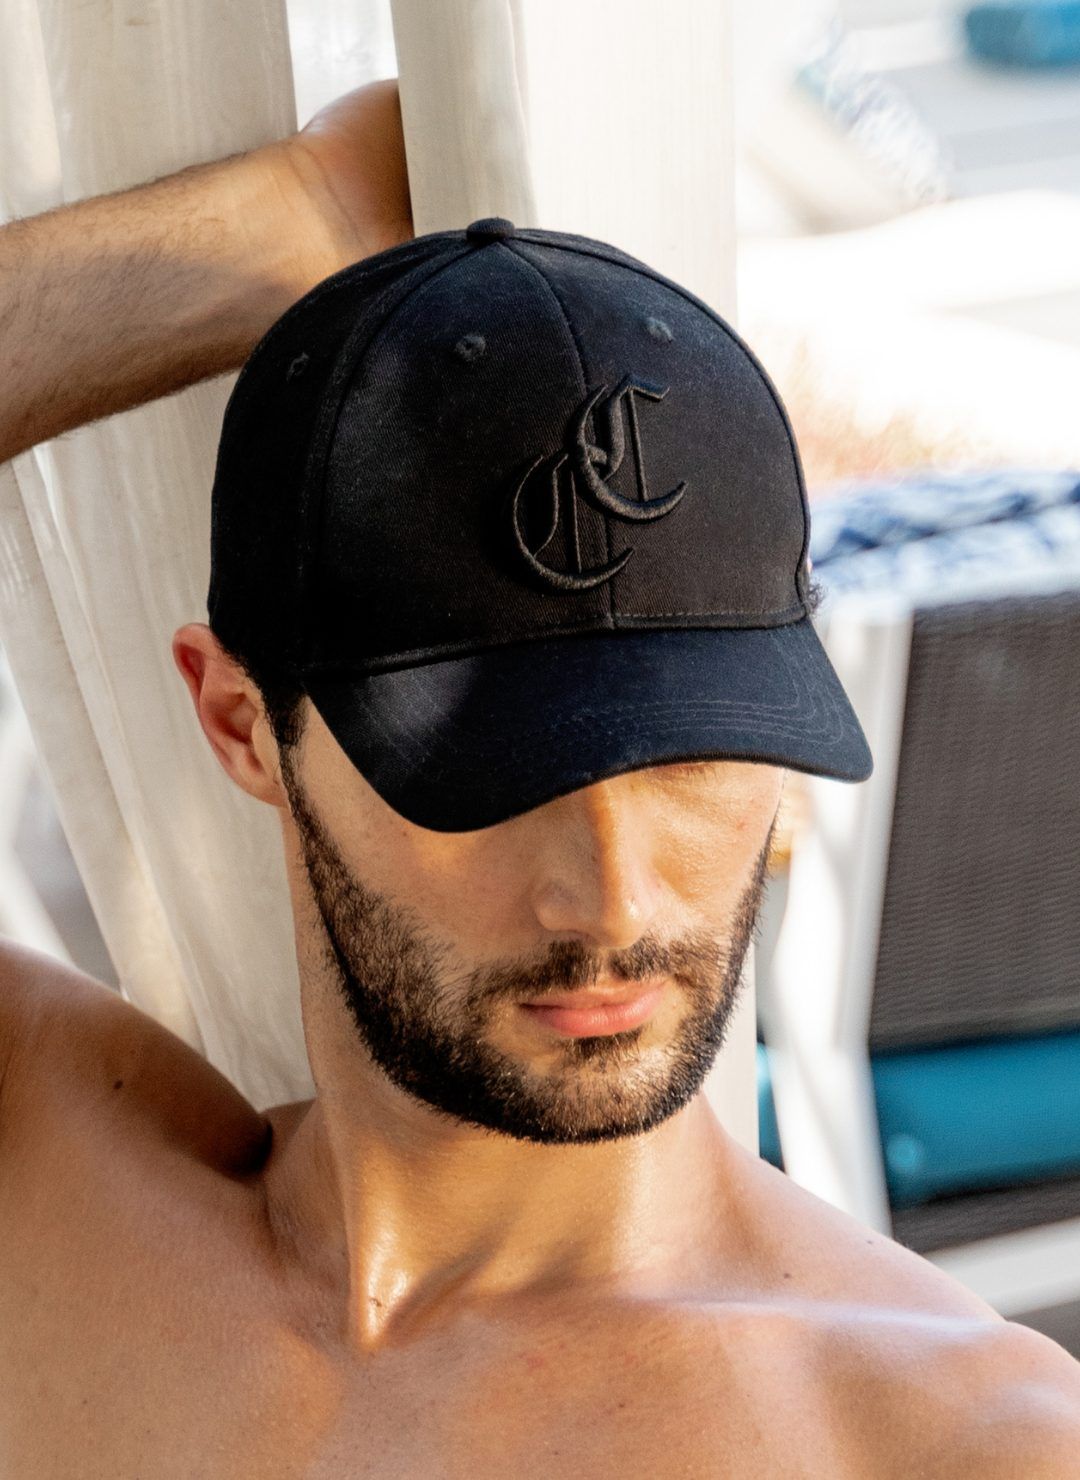 The Burleigh Cap is a classic black baseball cap style with logo embroidery. Part of the CAHA CAPO accessories range.